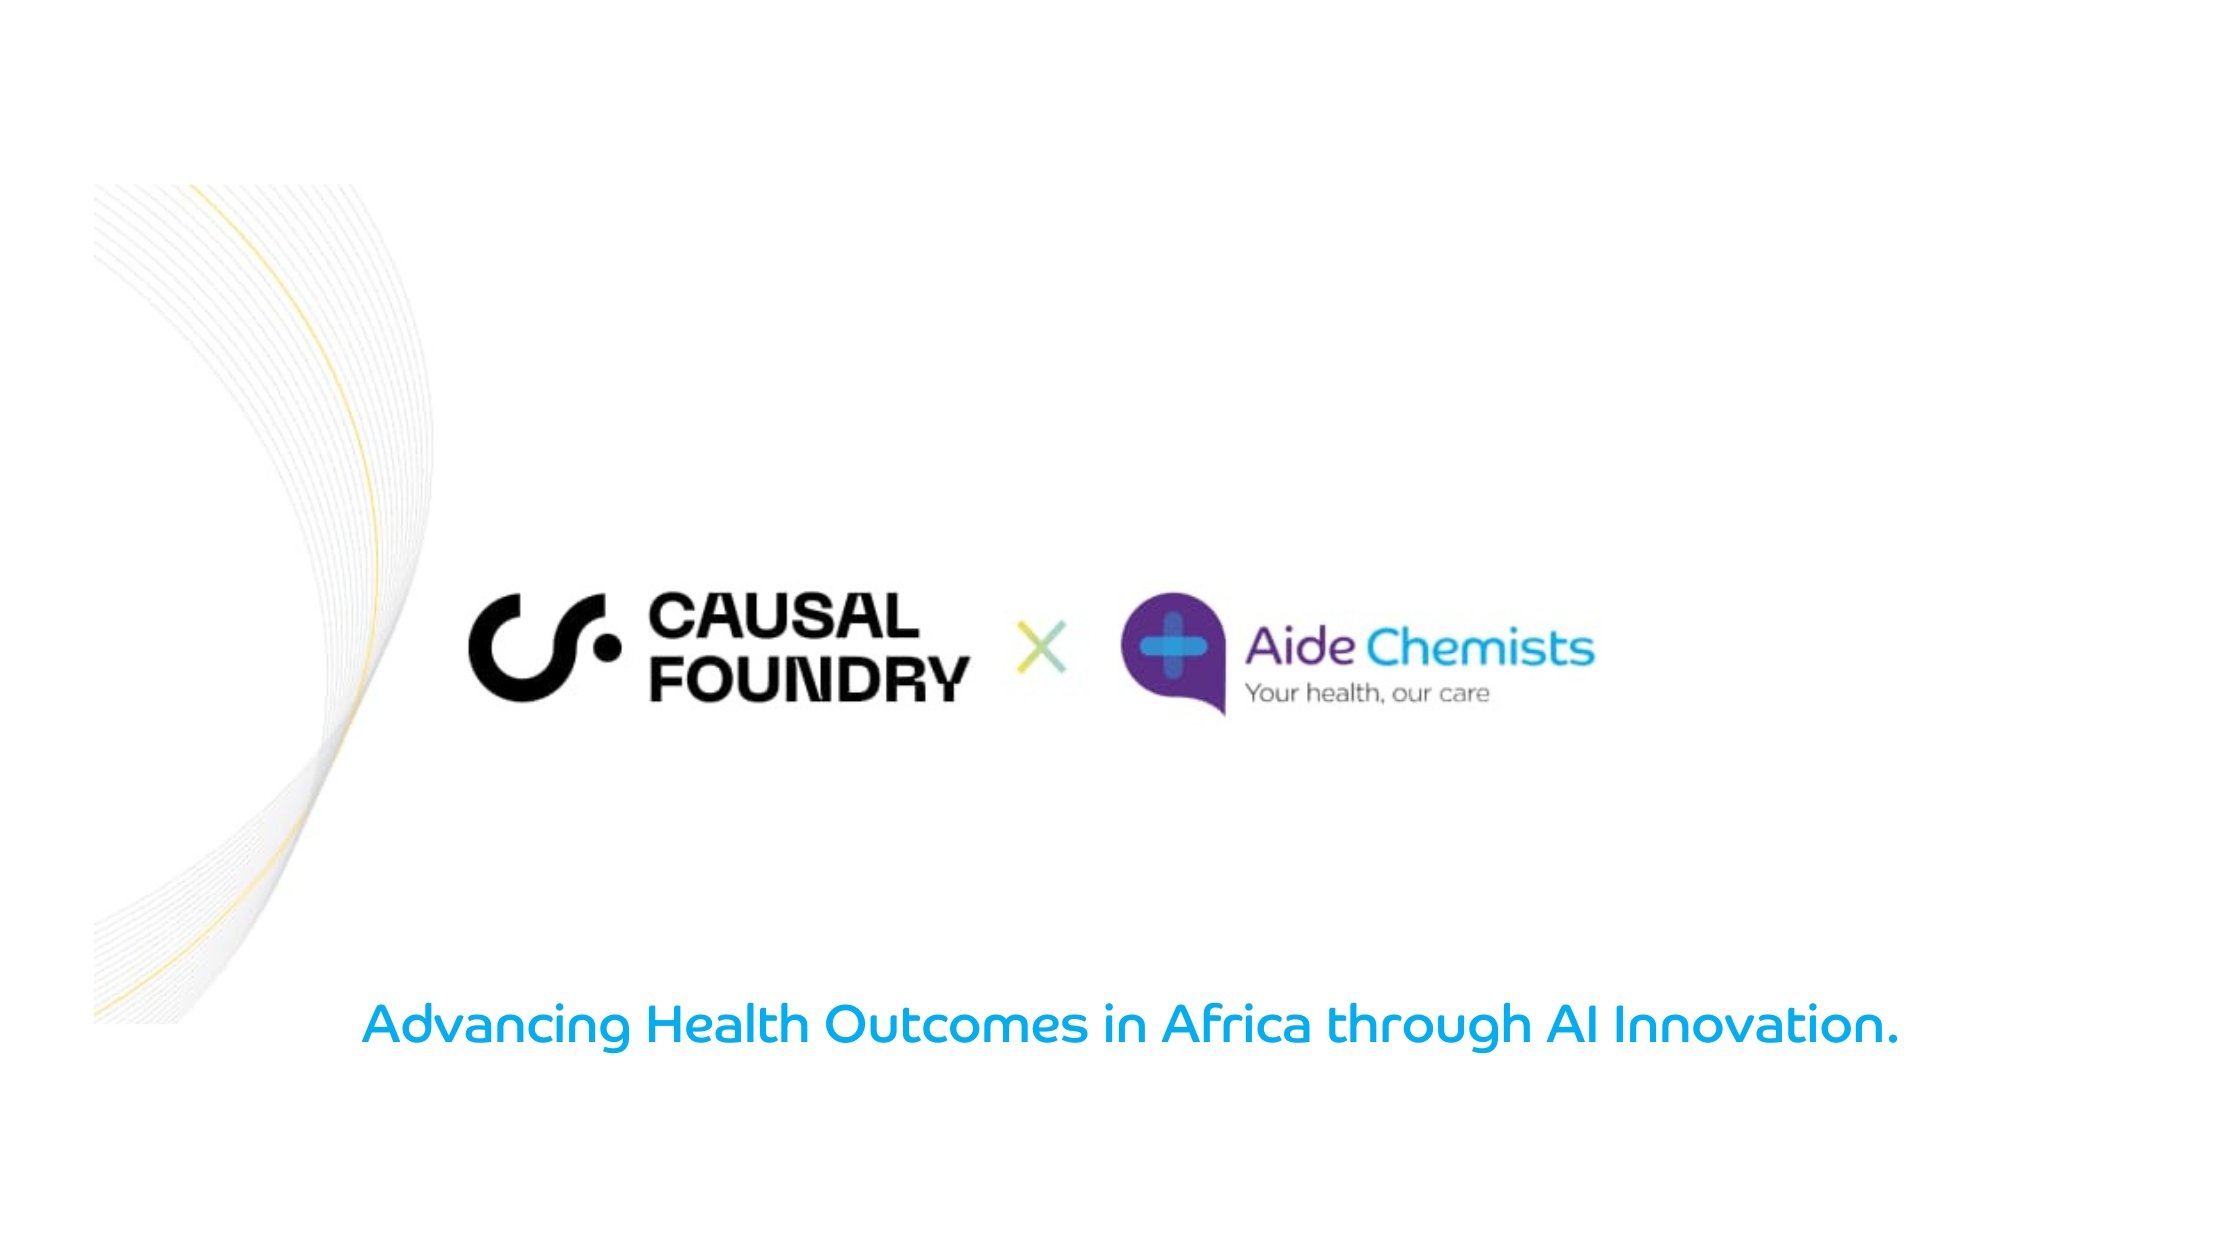 Aide Chemists And Causal Foundry Collaborate To Enhance Healthcare In African Communities With AI-Powered Solutions